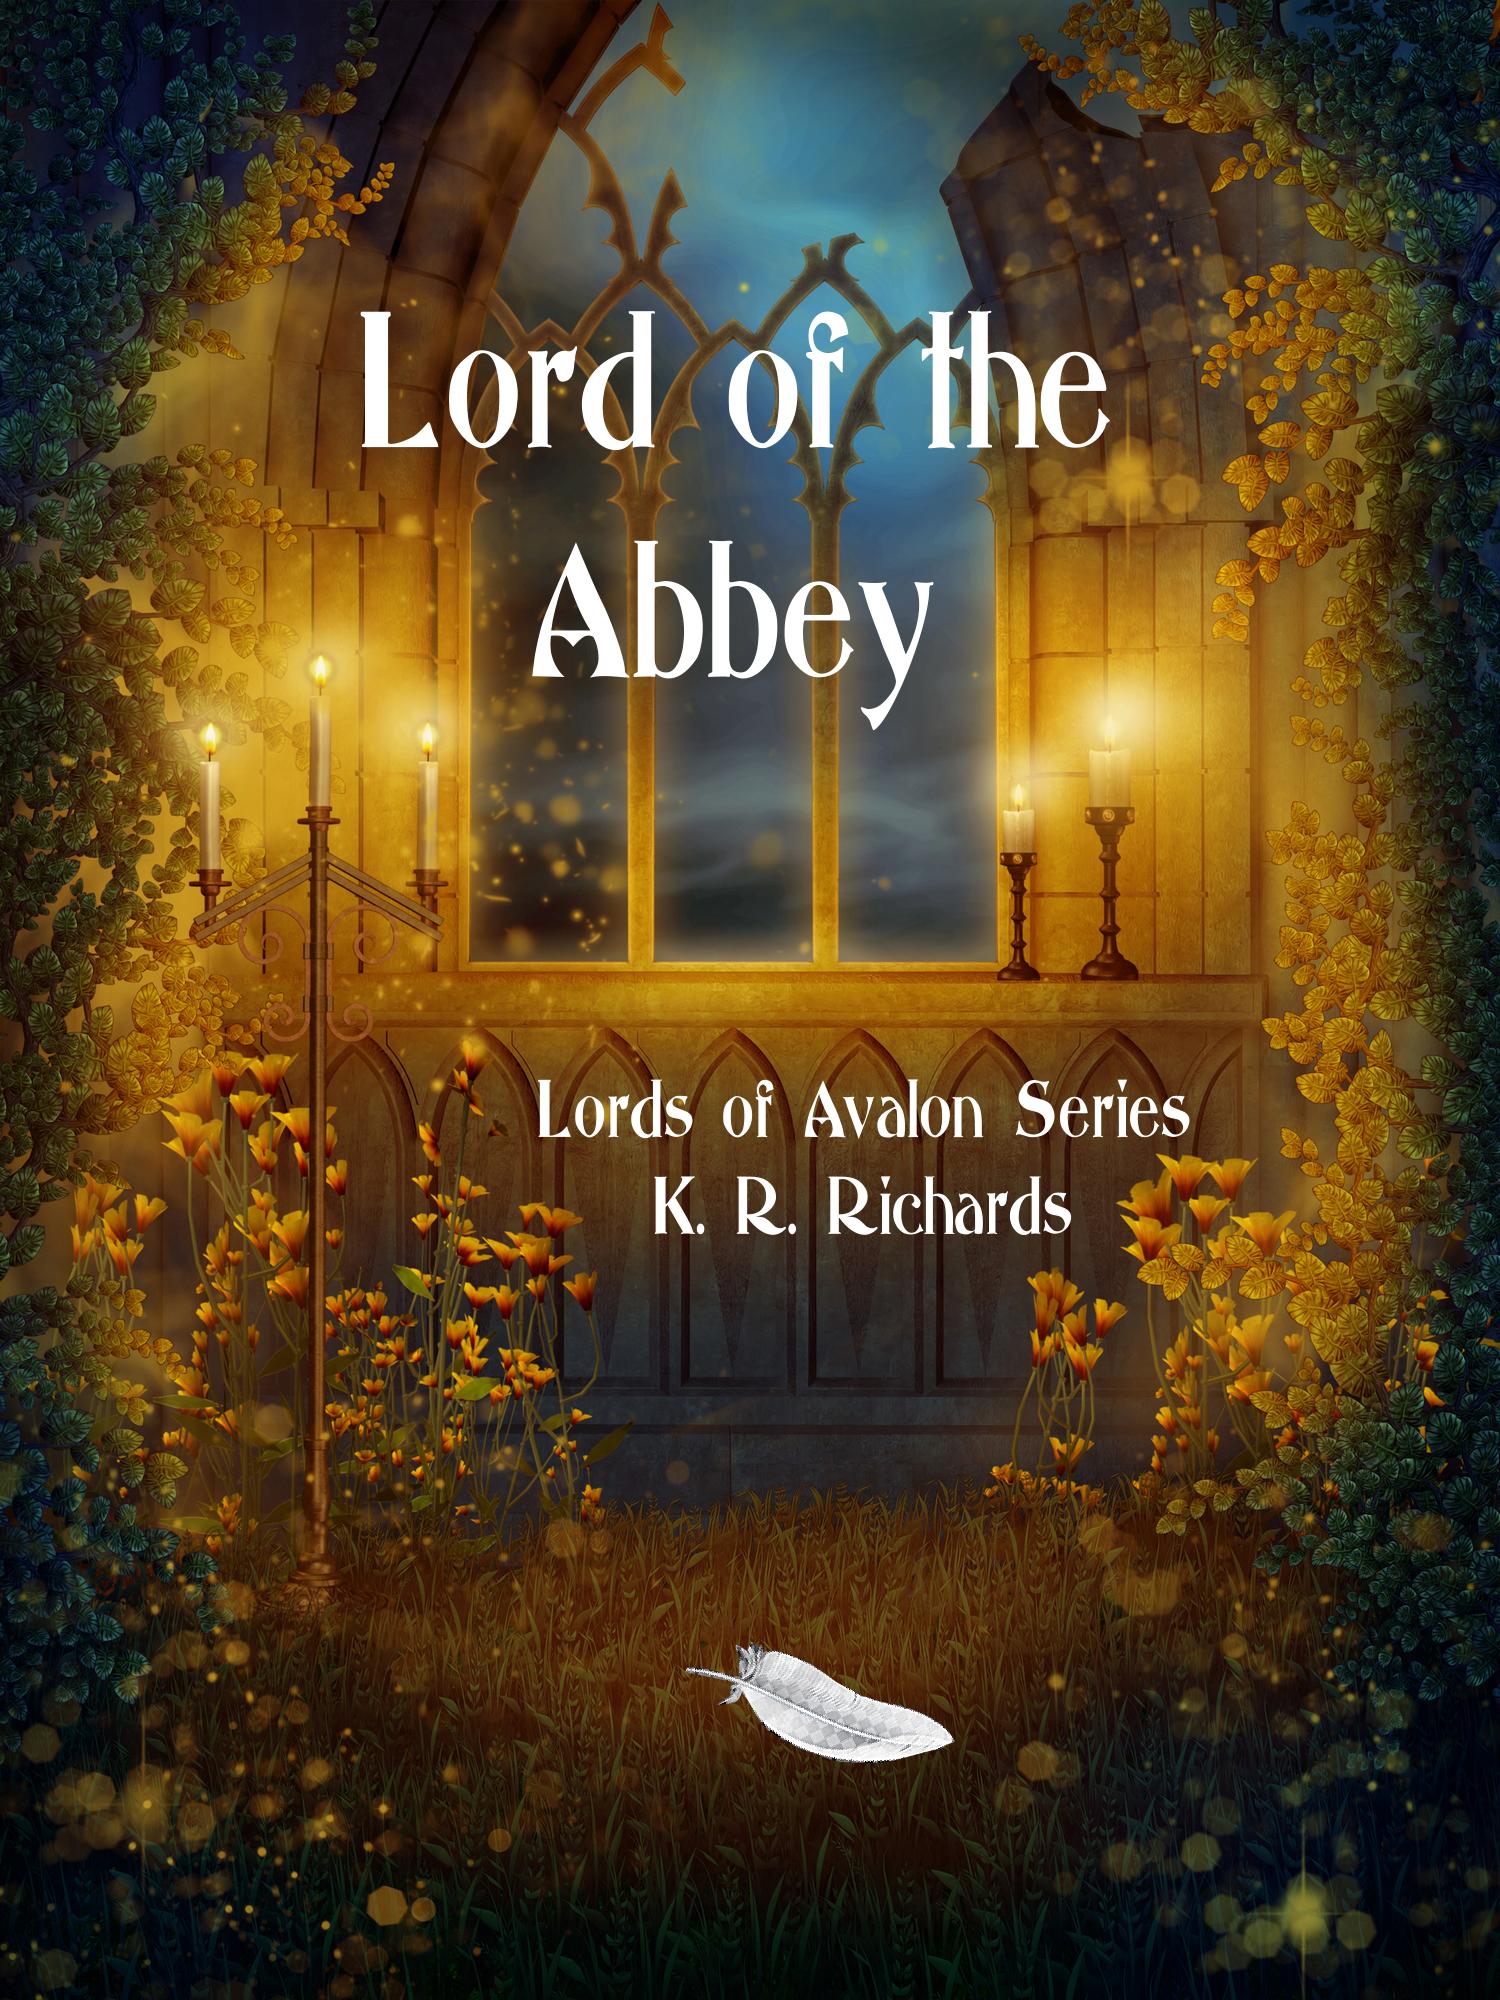 Lord of the Abbey by K. R. Richards